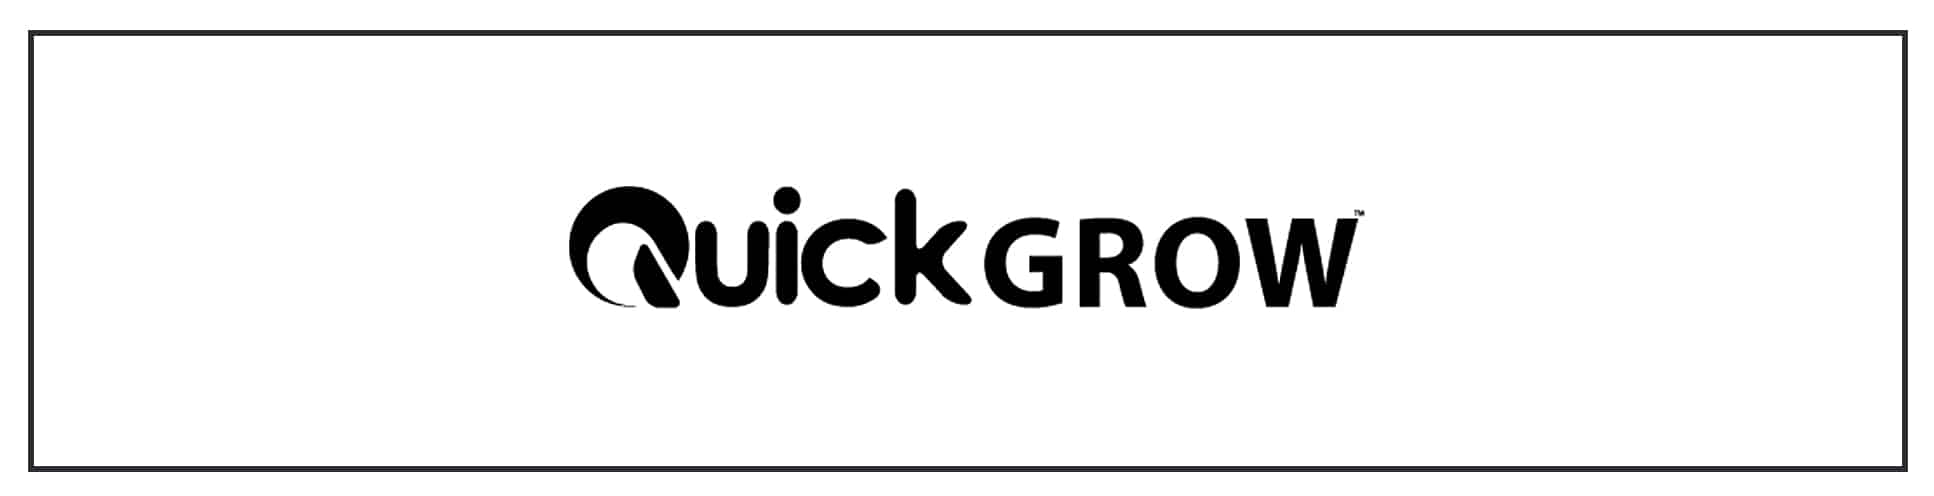 Quick grow logo on a white background.